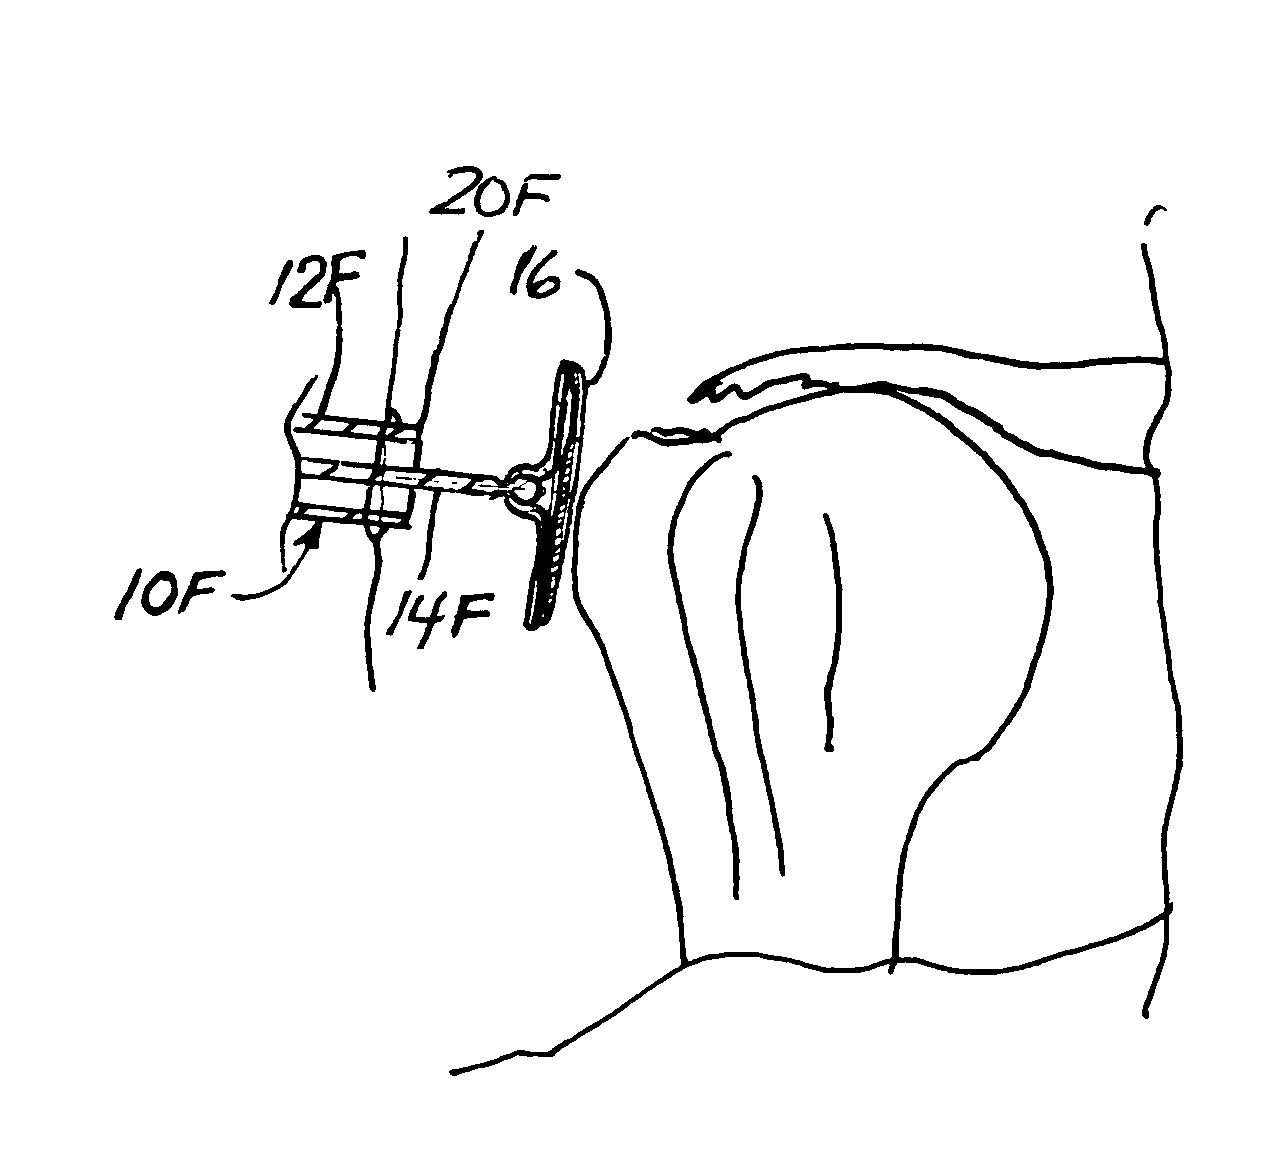 Implant delivery instrument